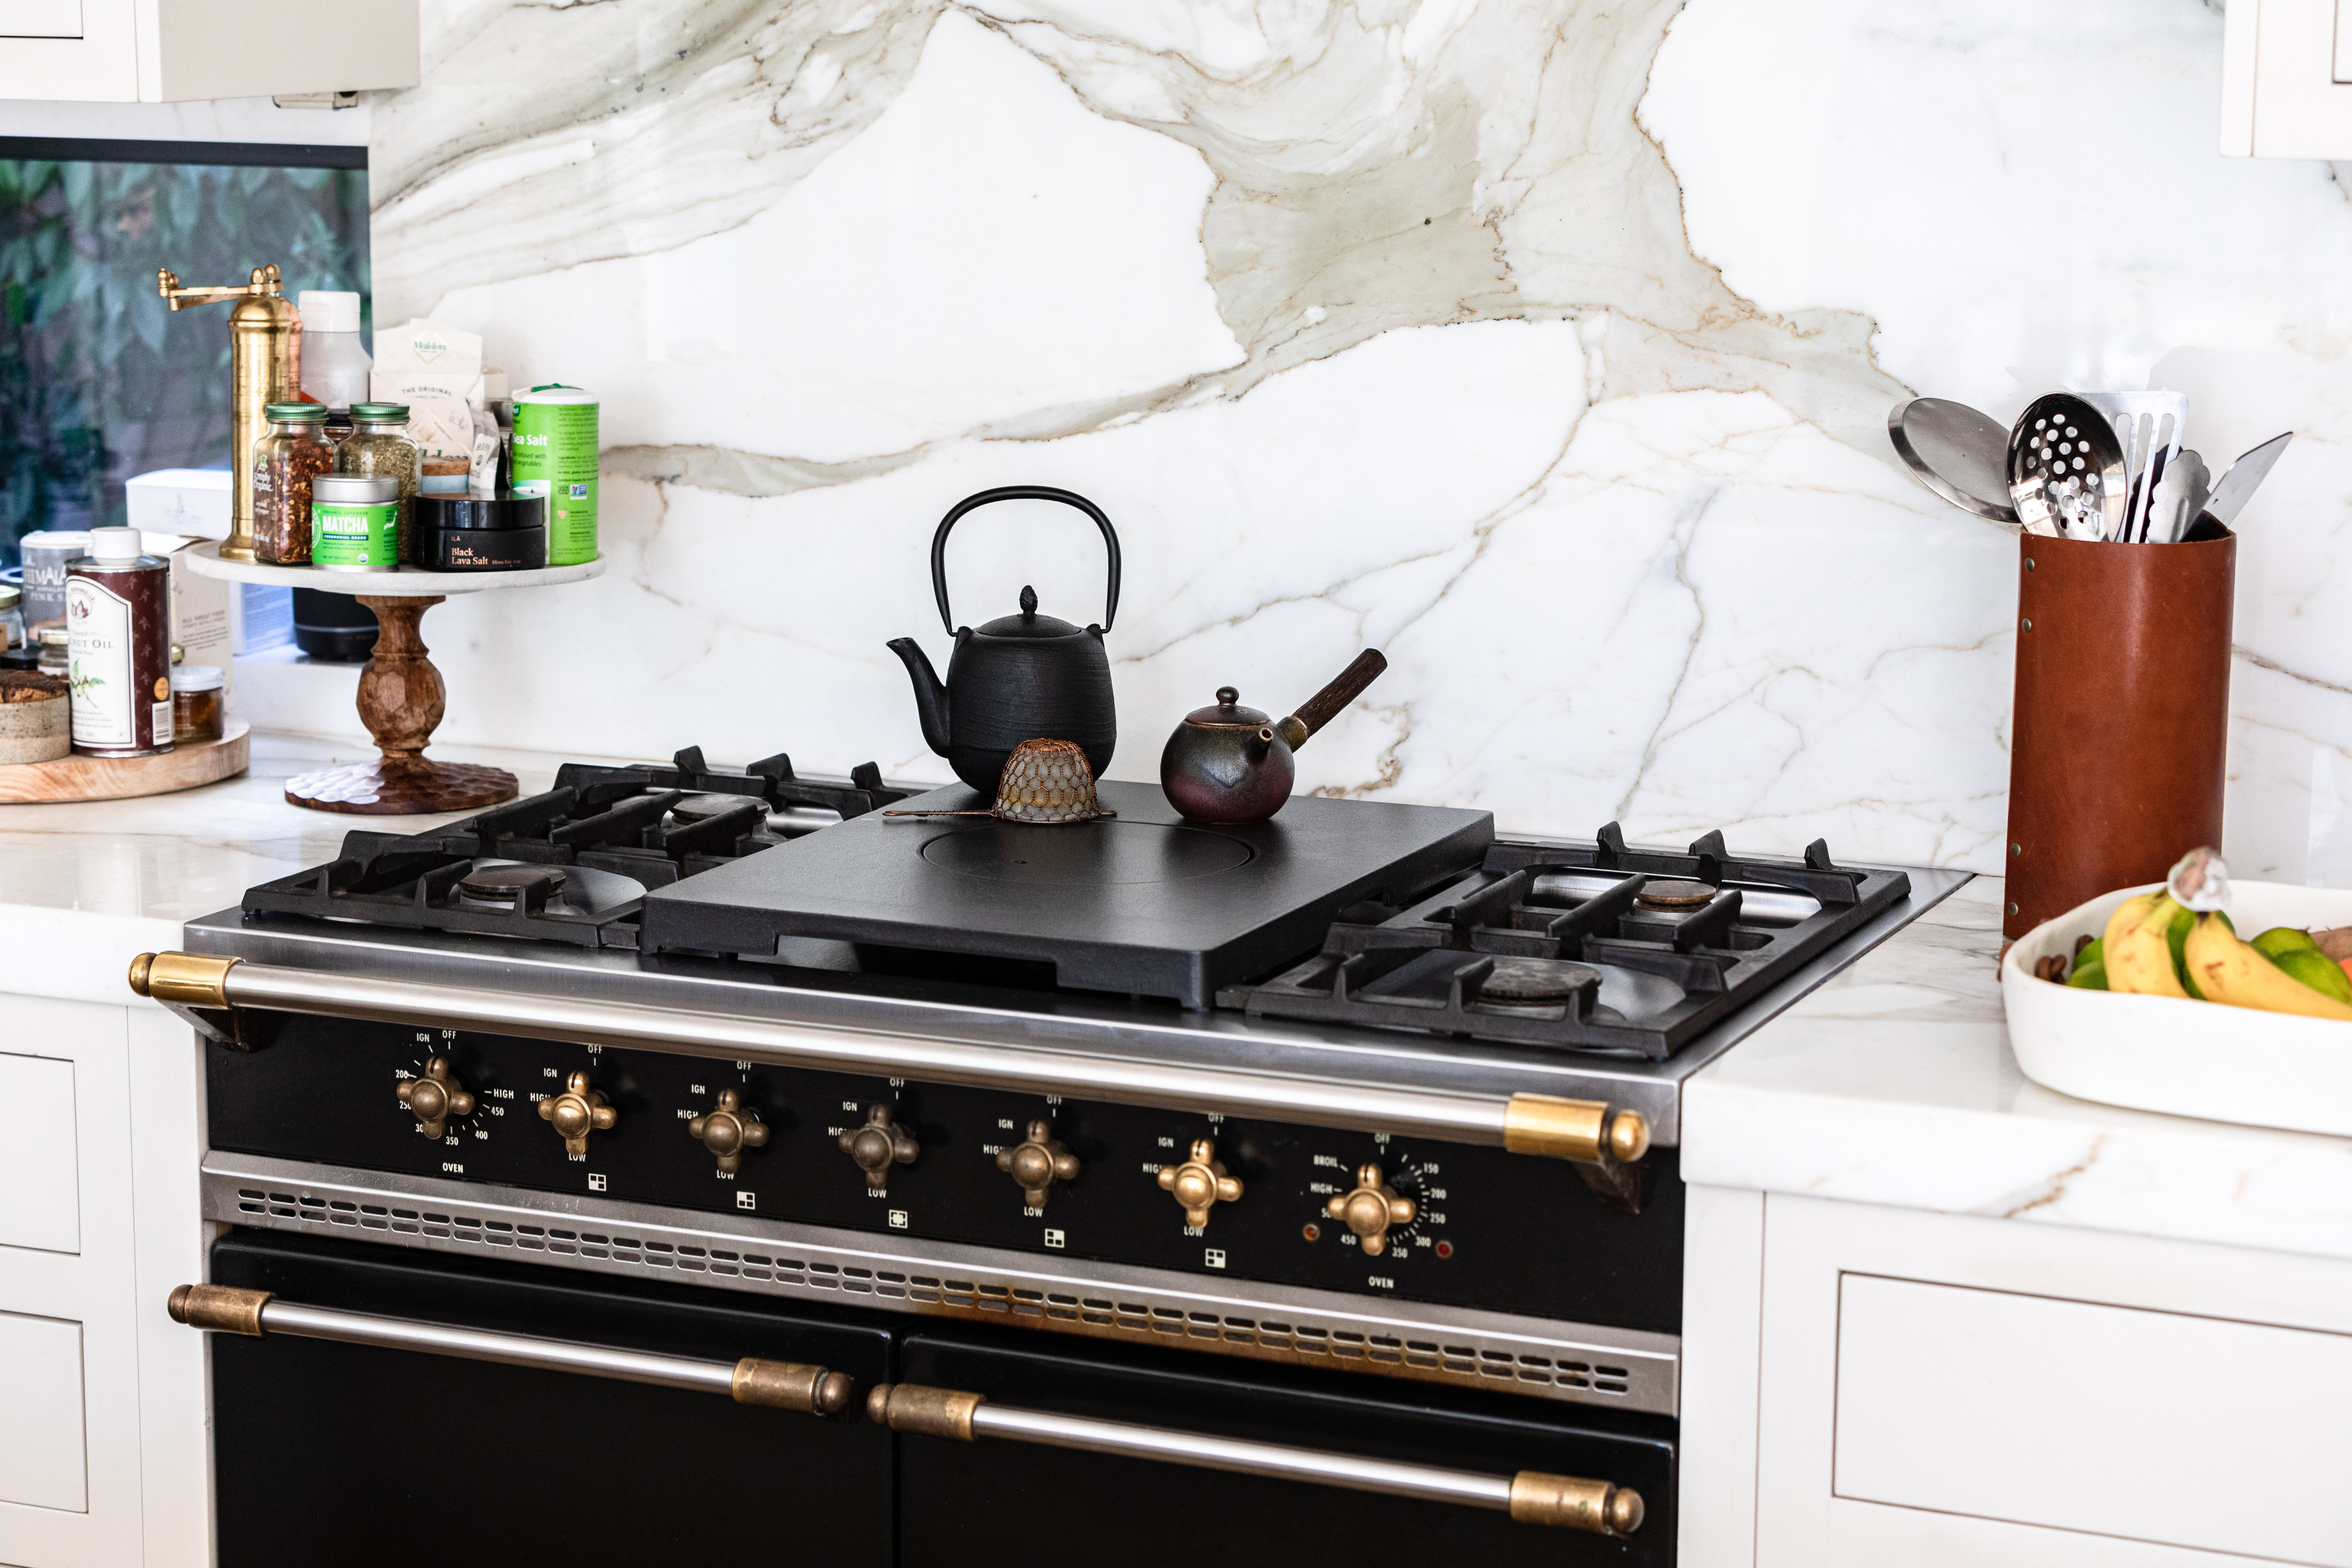 16 All-Black Kitchen Items That Match Your Soul